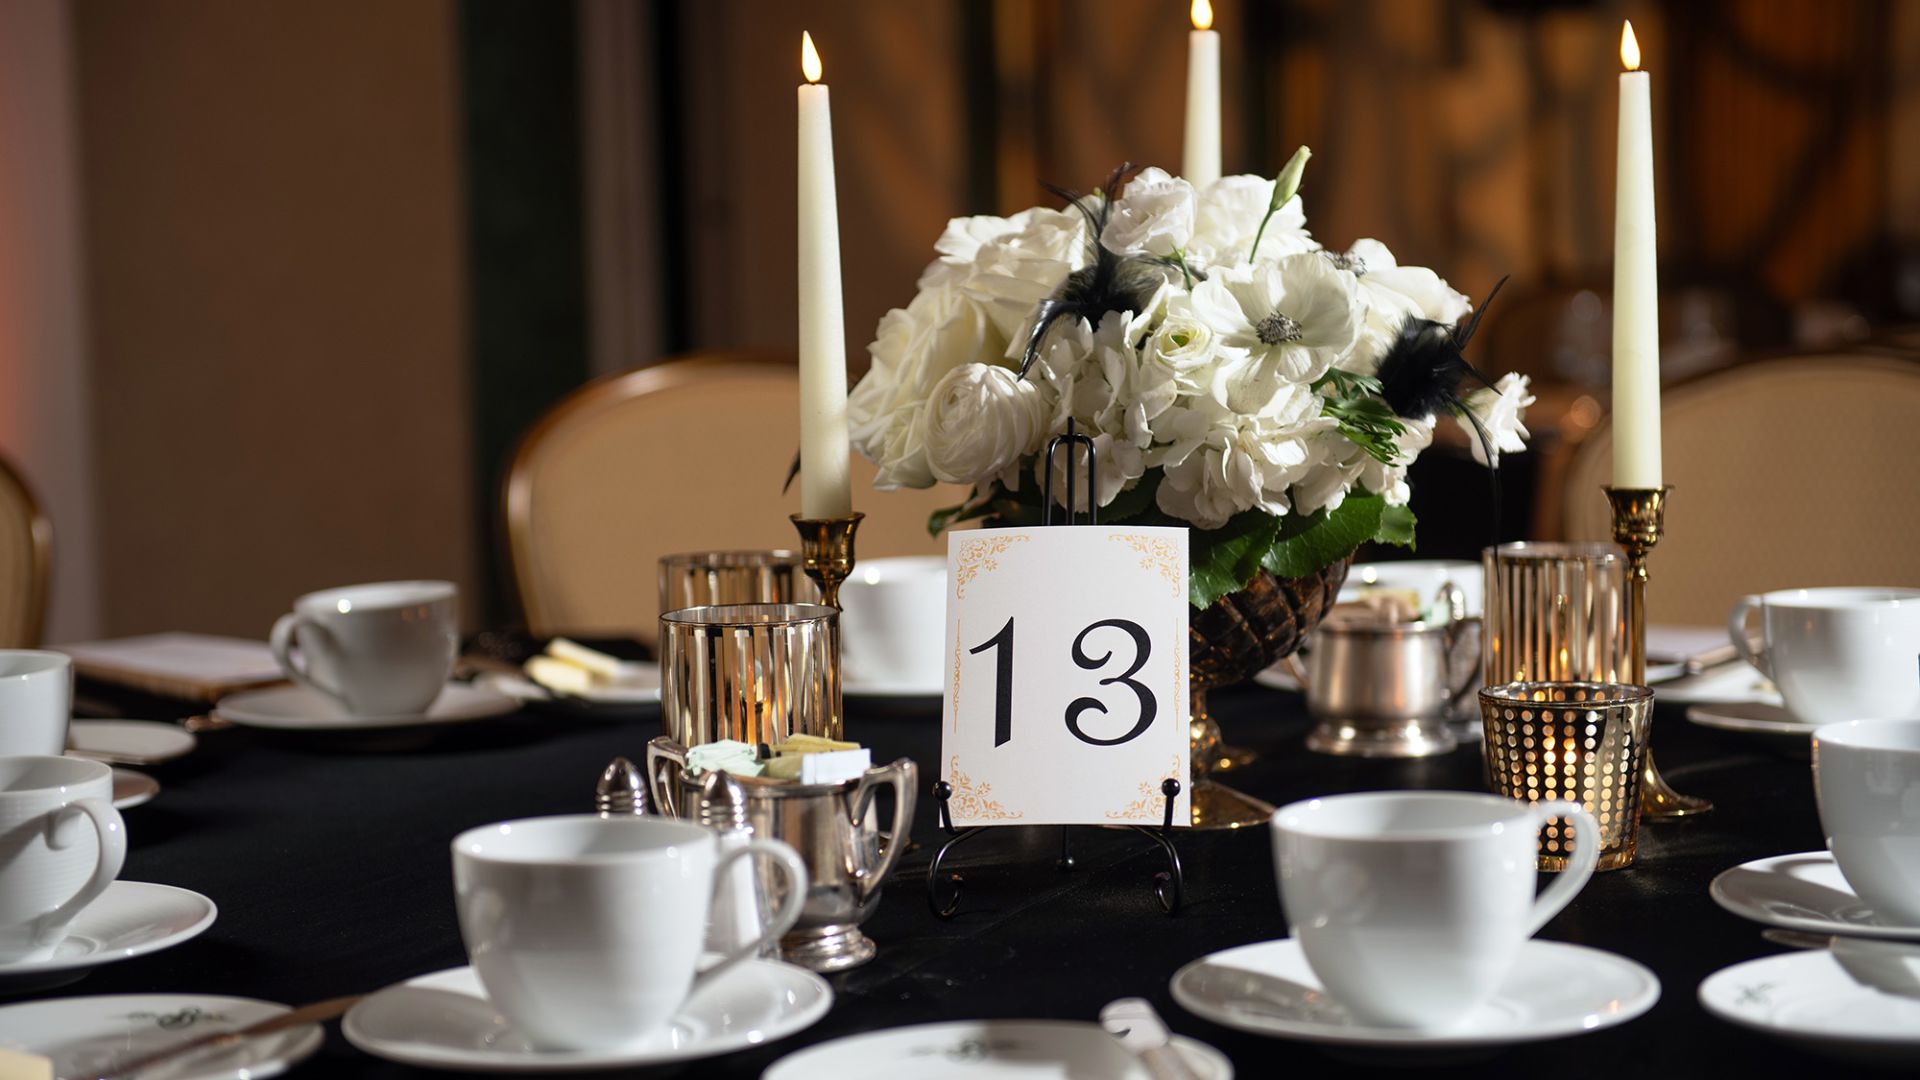 A Table With White Flowers And Candles